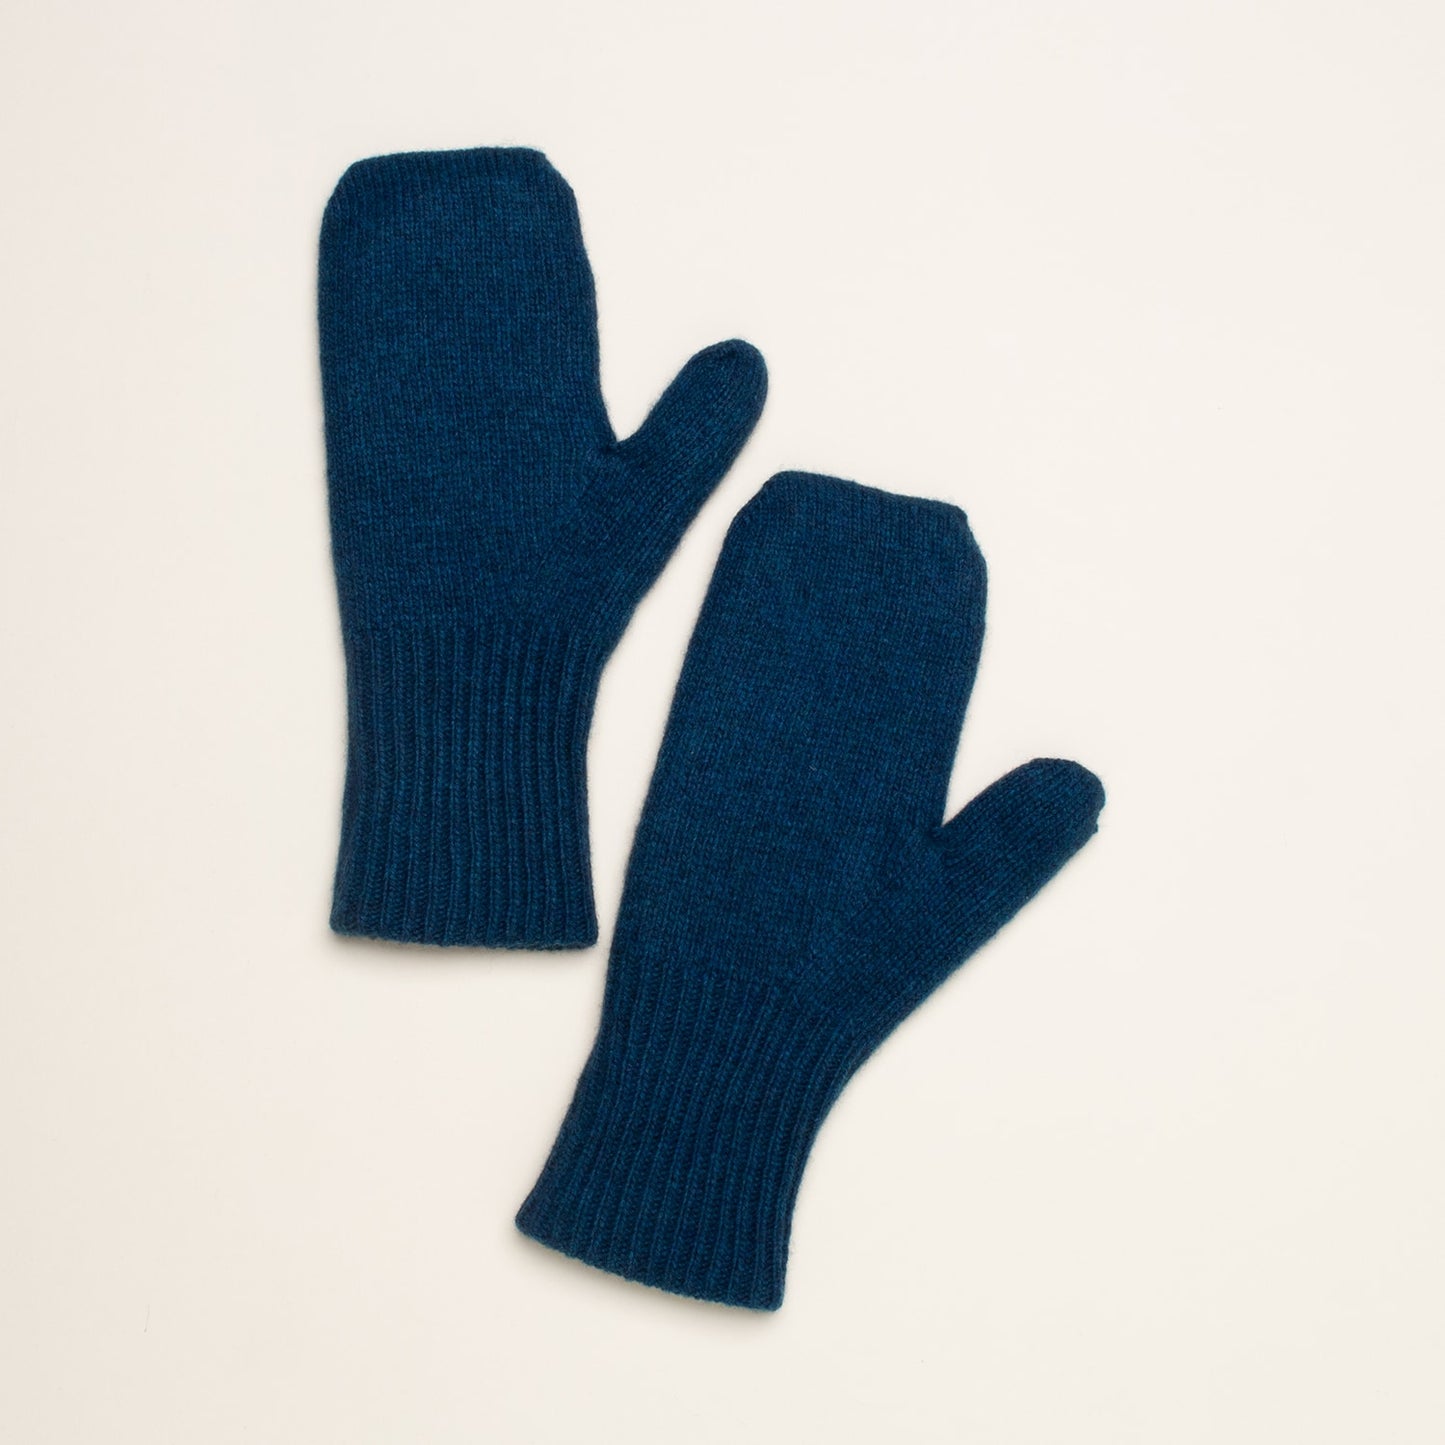 The Cashmere Mittens